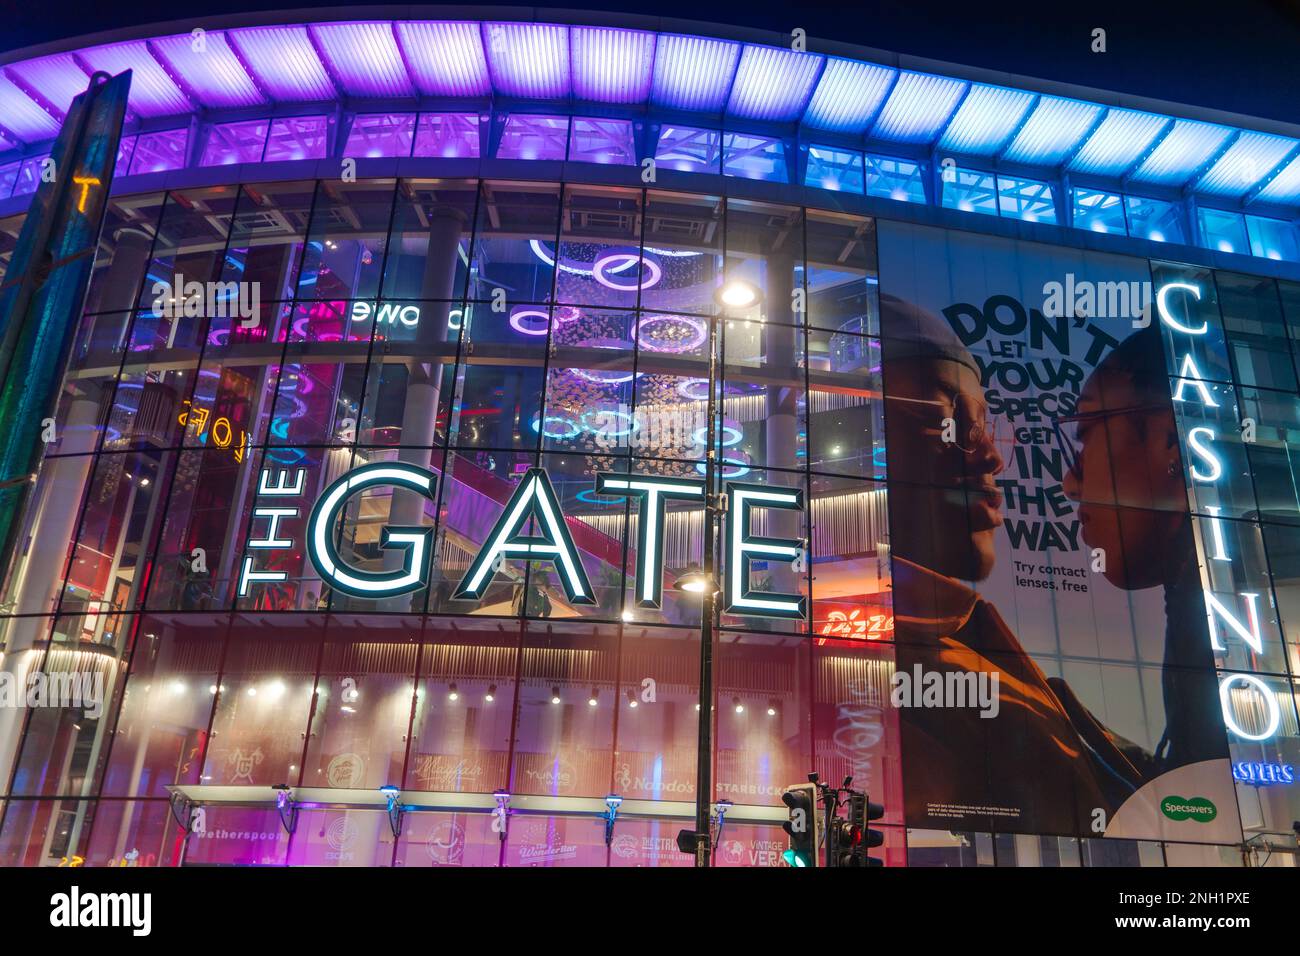 The Gate - a complex comprising a cinema, bars, restaurants, arcades and casino in the city of Newcastle upon Tyne, UK, seen at night. Stock Photo